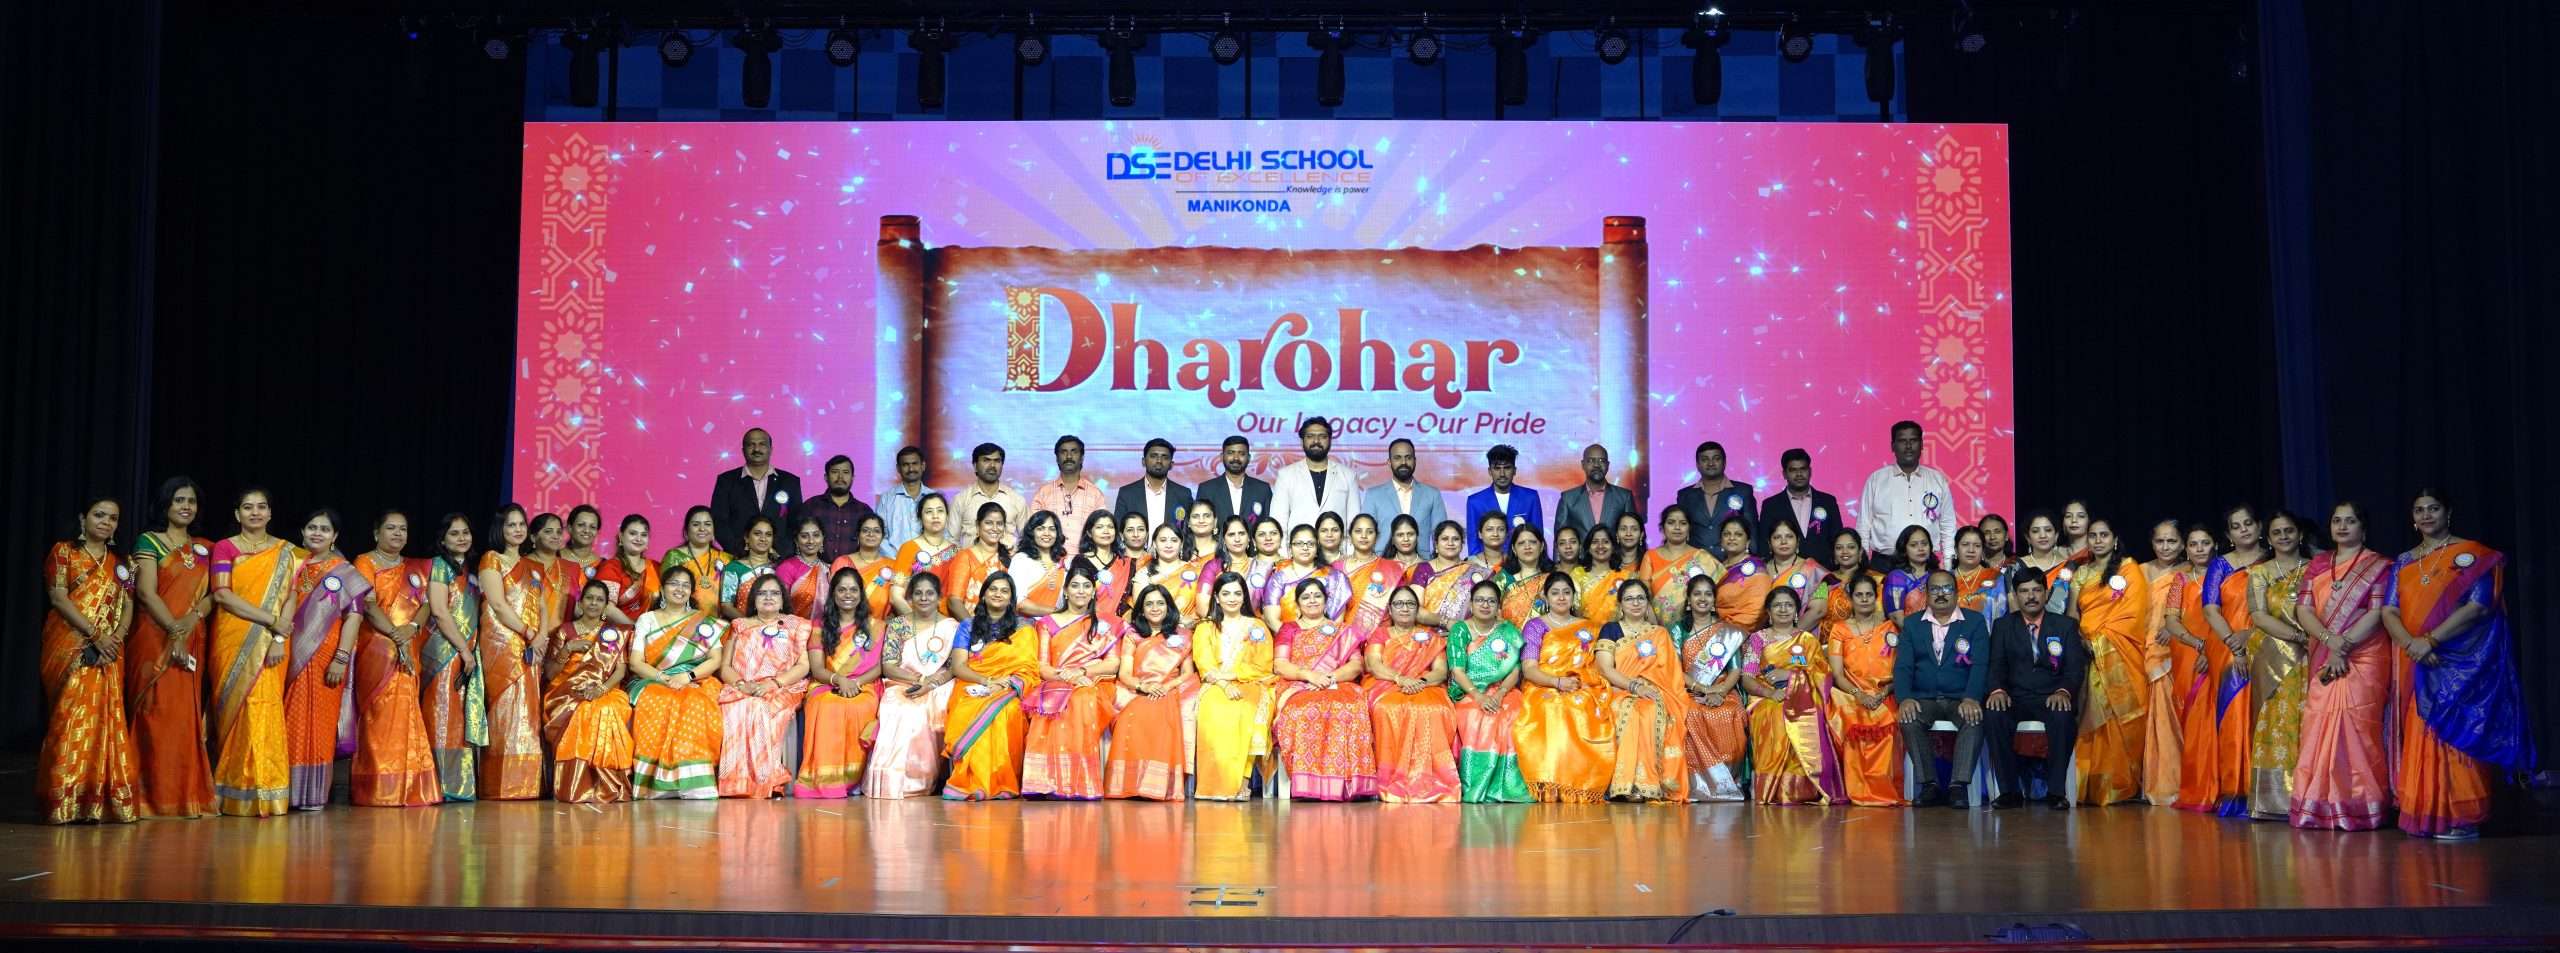 Dharohar – Our Legacy Our Pride